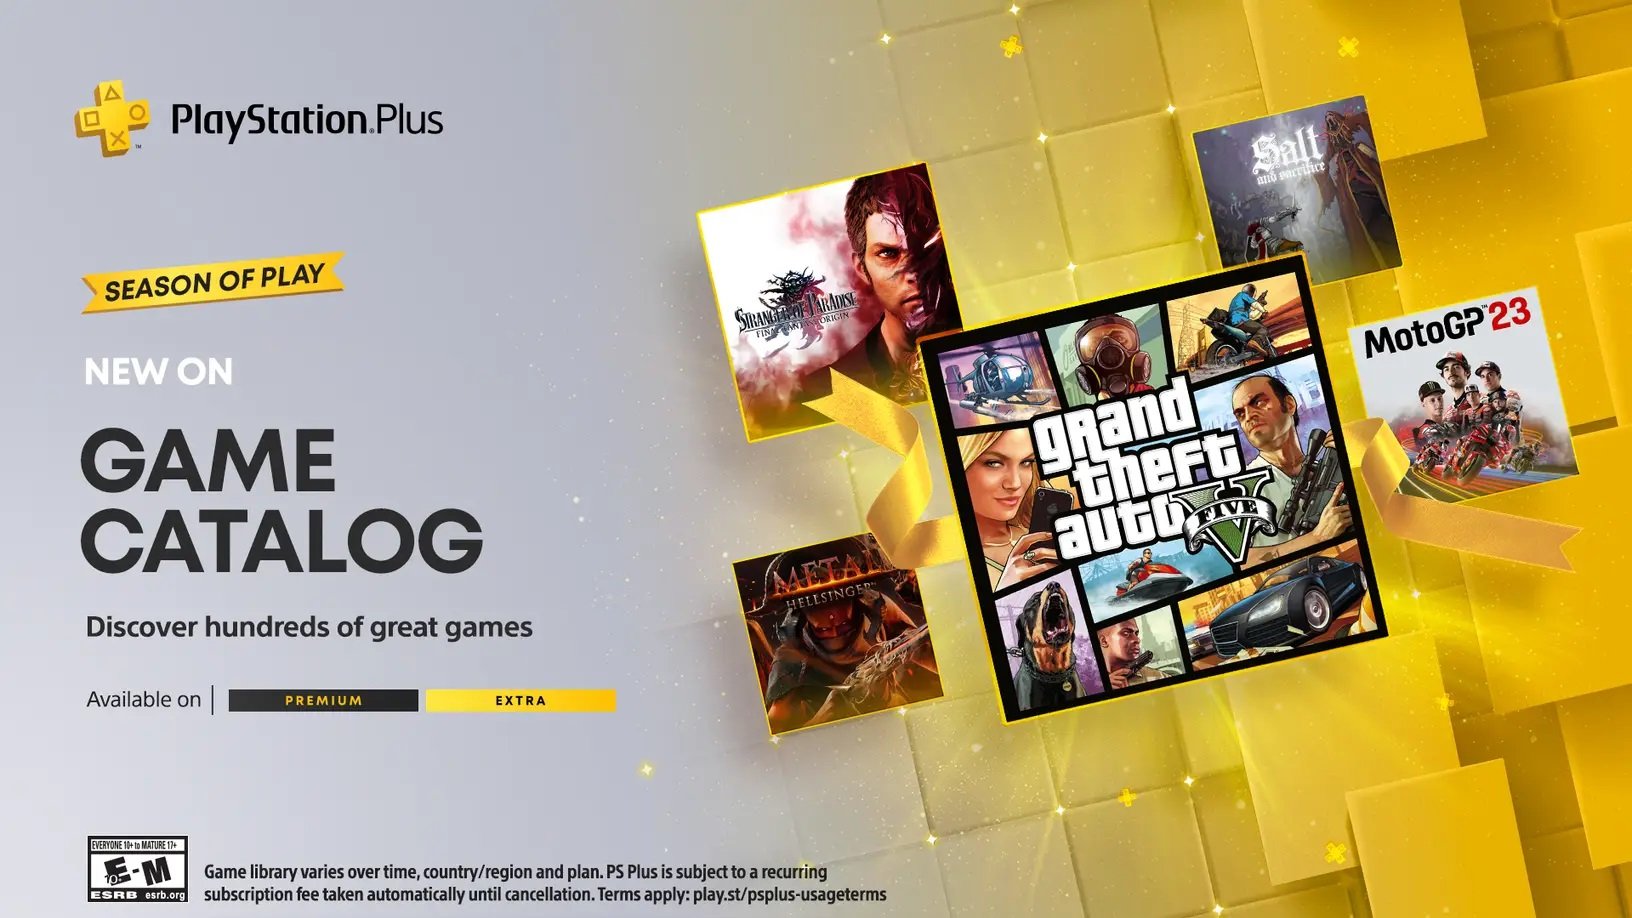 12 New Games Available Now On PlayStation Plus Extra And PS Plus Premium